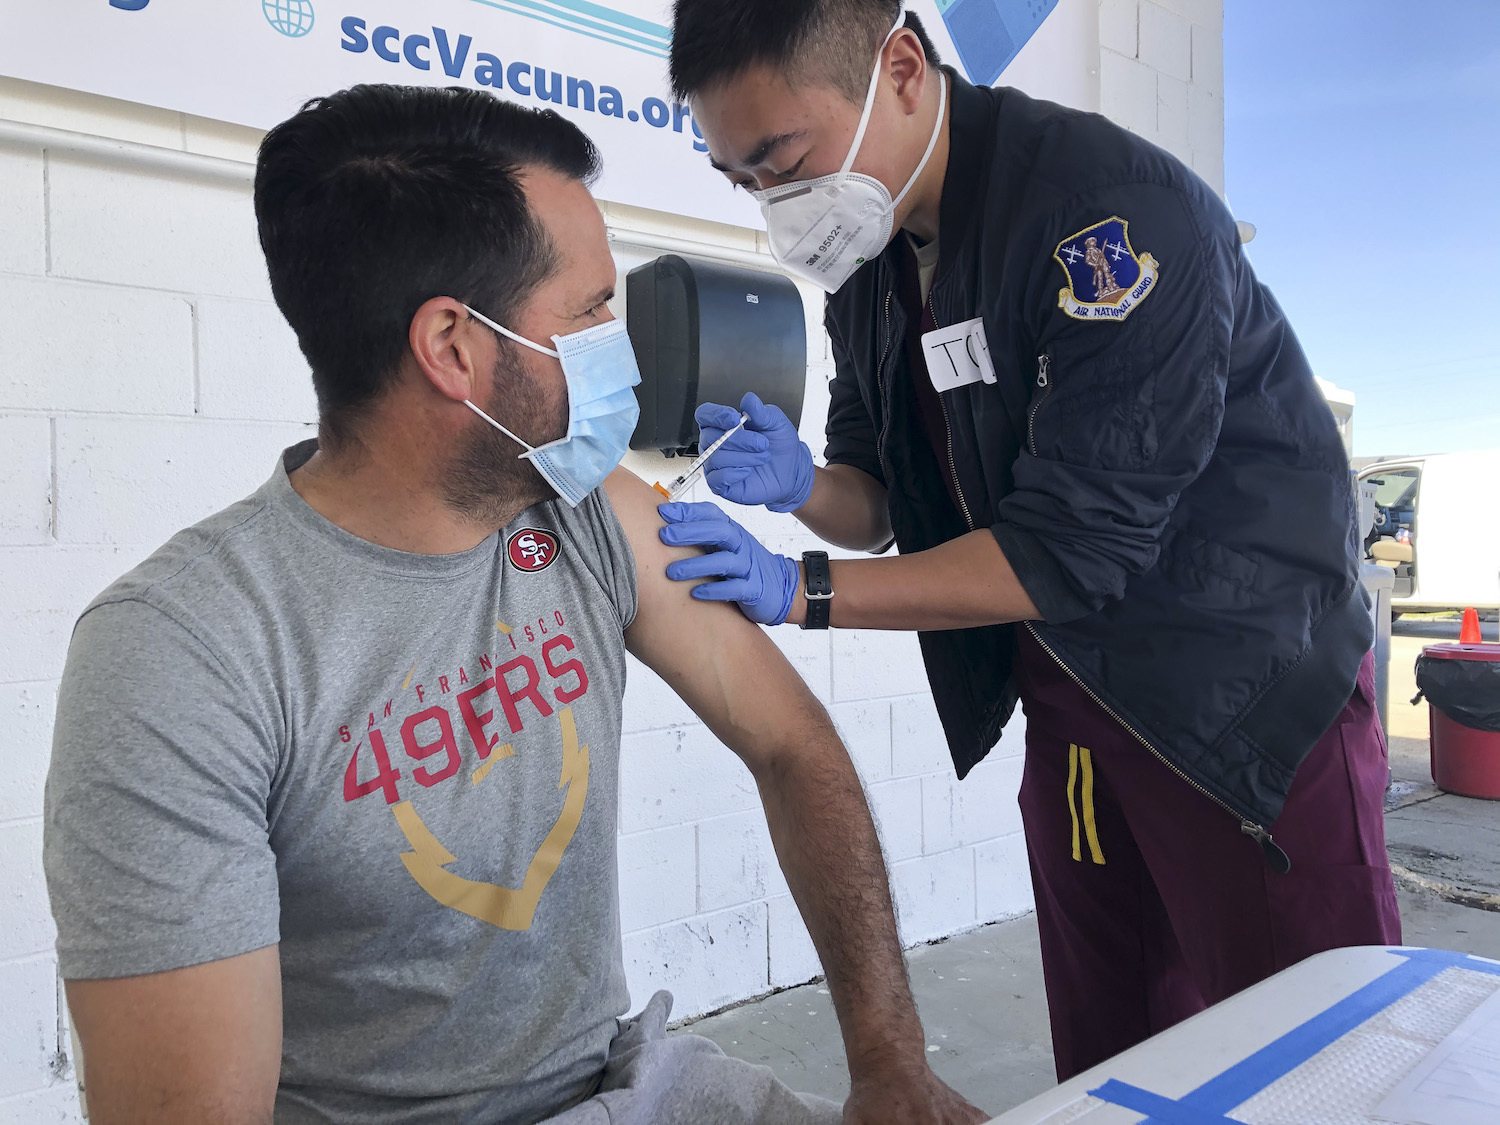 Mauricio Chavez of Hollister gets a COVID-19 vaccine at Monterey Mushrooms in Morgan Hill on Feb. 28, 2021. He works at a neighboring mushroom farm. Many California farmworkers still face obstacles getting the vaccine.